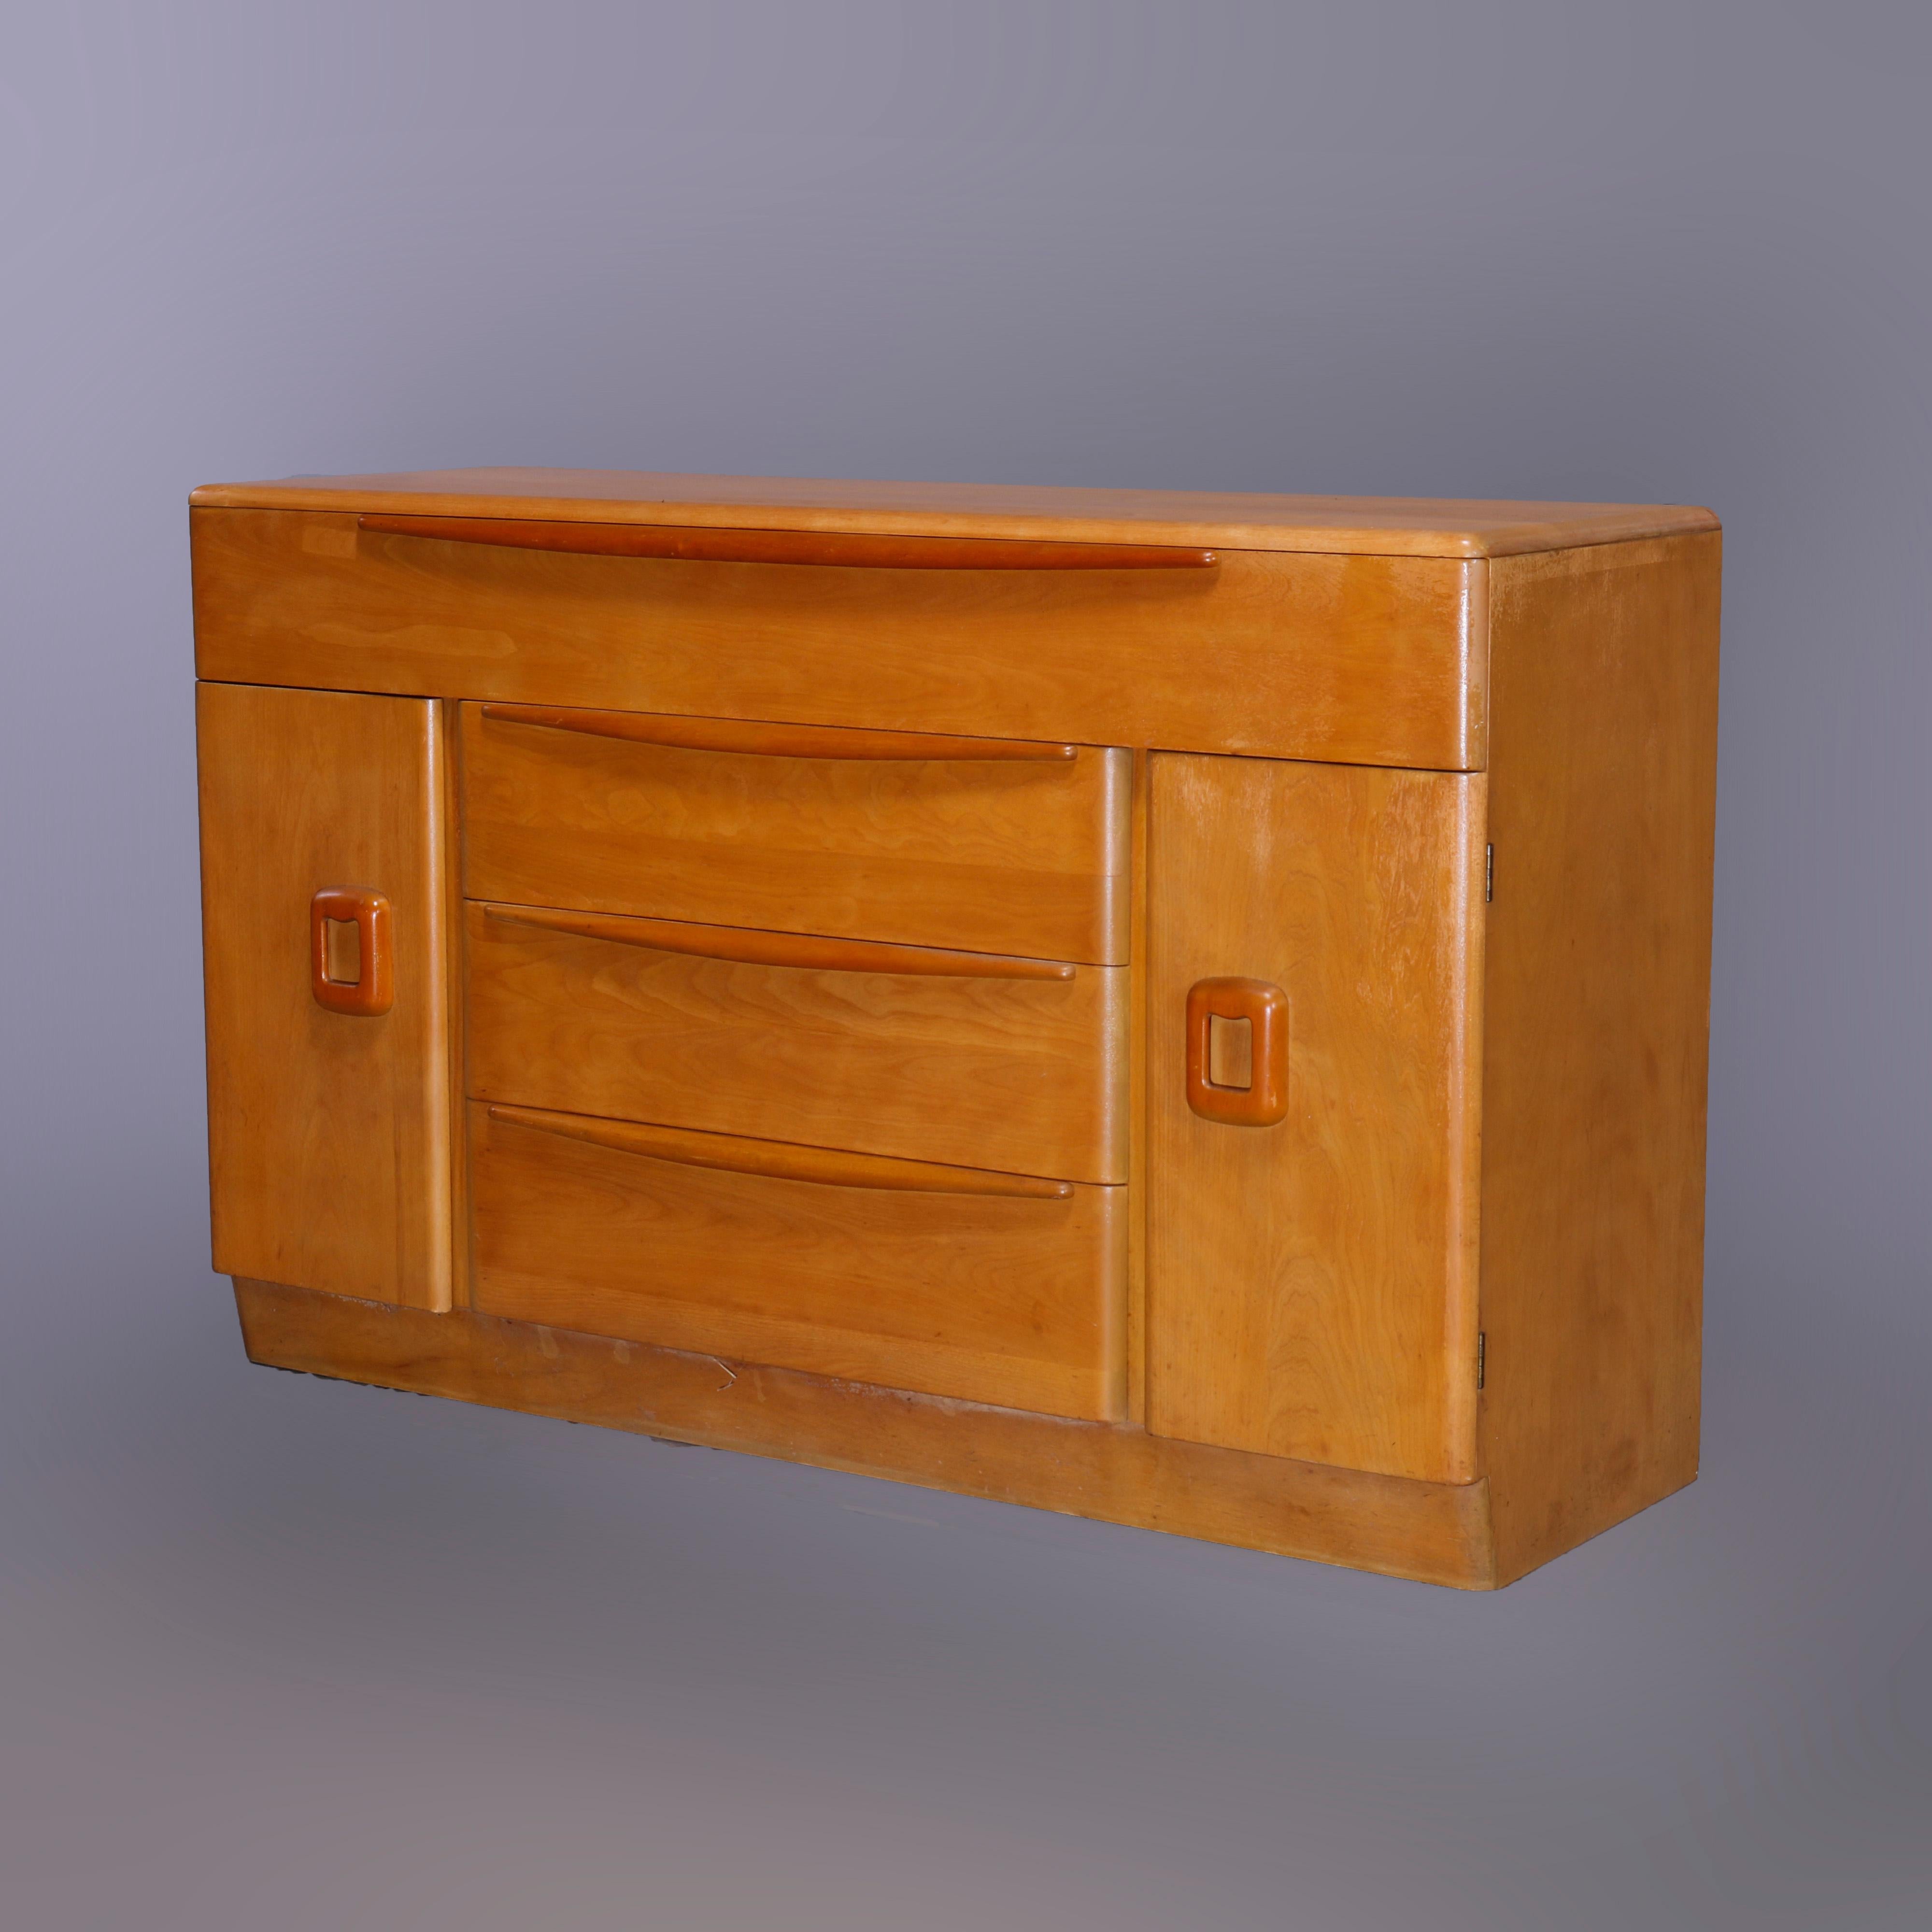 A Mid-Century Modern credenza by Heywood Wakefield in Isabel offers birch construction in the Wheat finish with the frieze drawer surmounting a central drawer tower and flanking cabinets, maker and finish stamps as photographed, c1950

Measures -